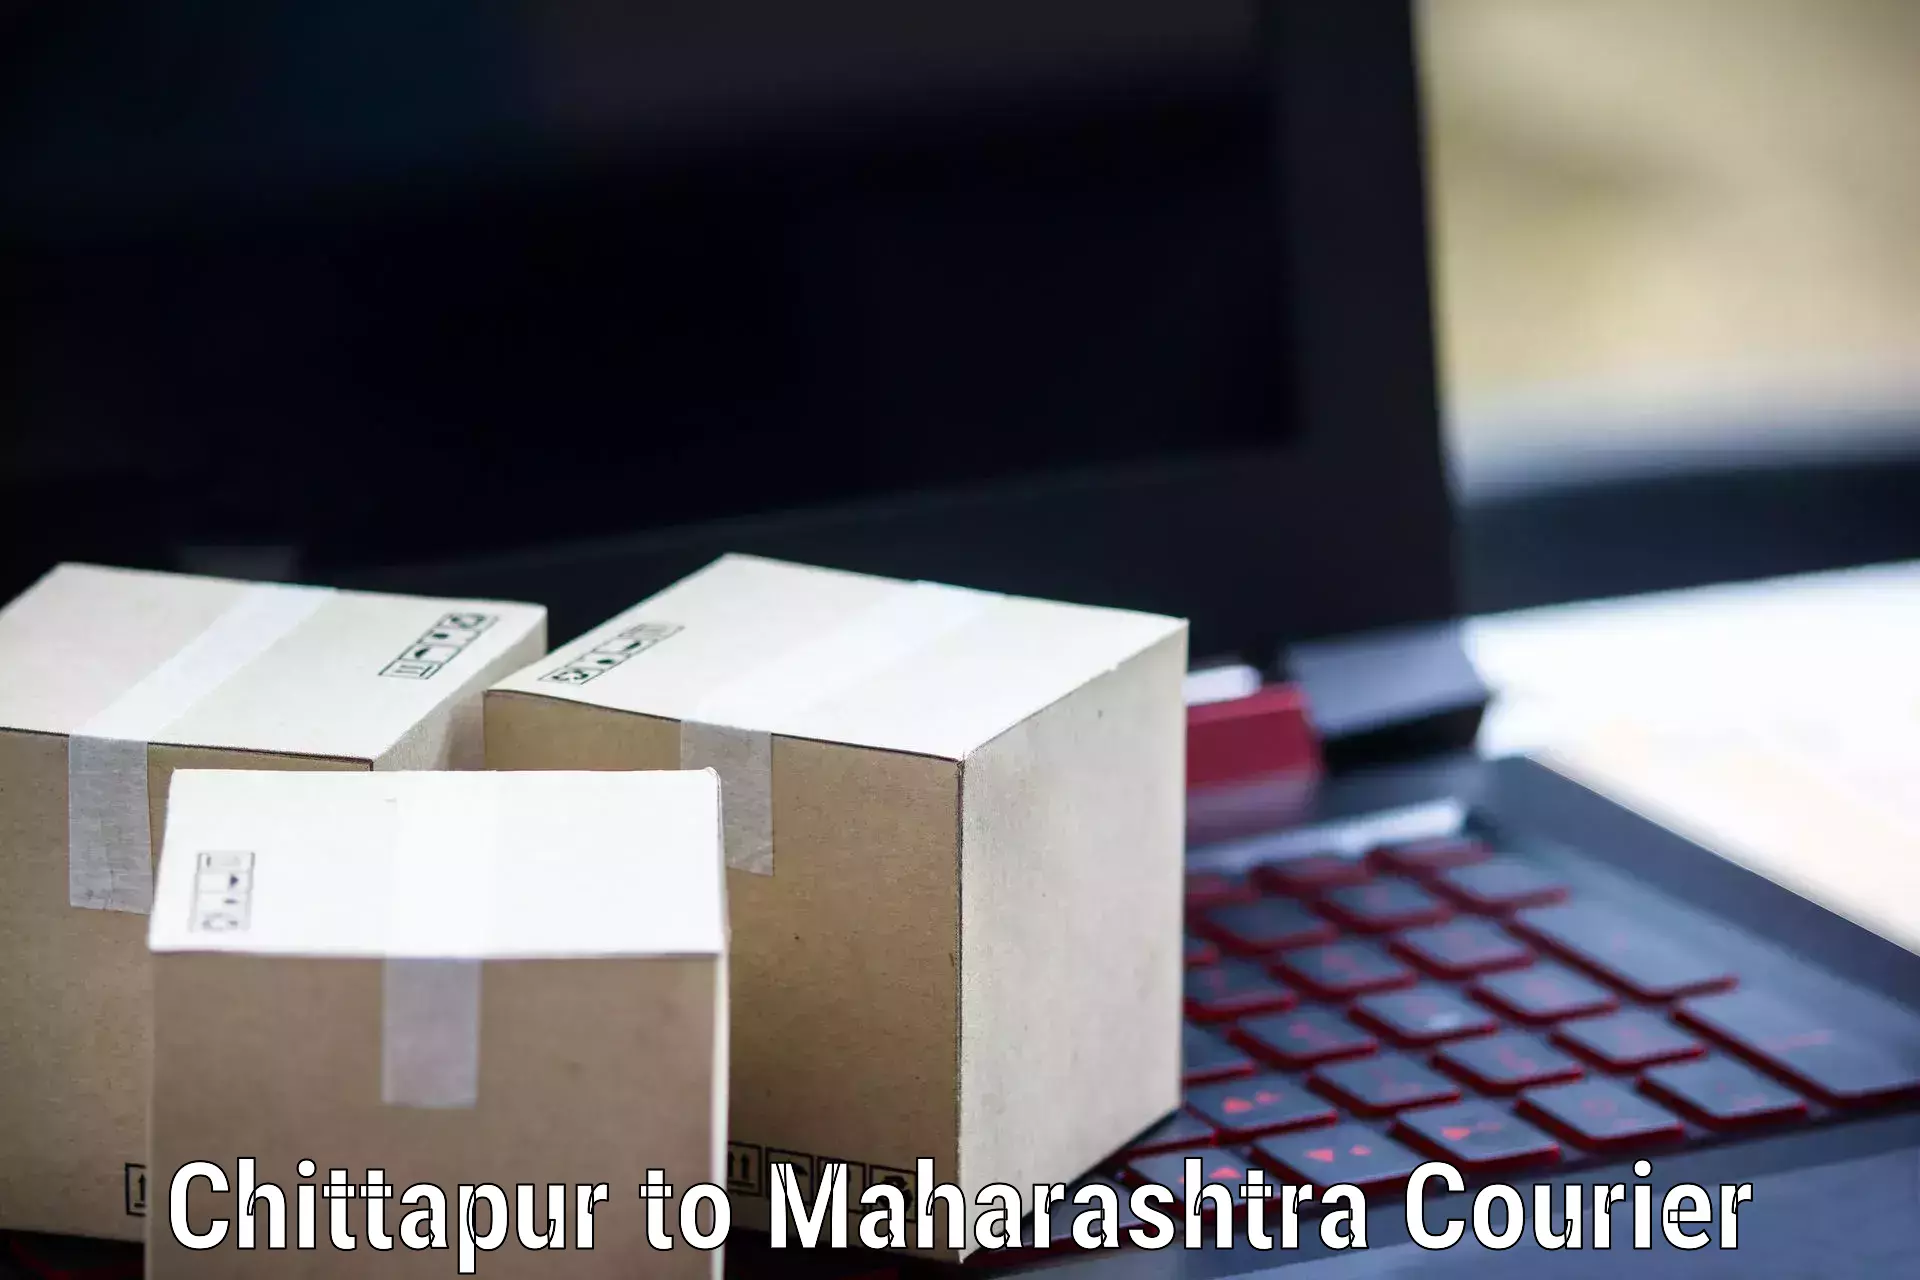 Fast delivery service Chittapur to Chandrapur